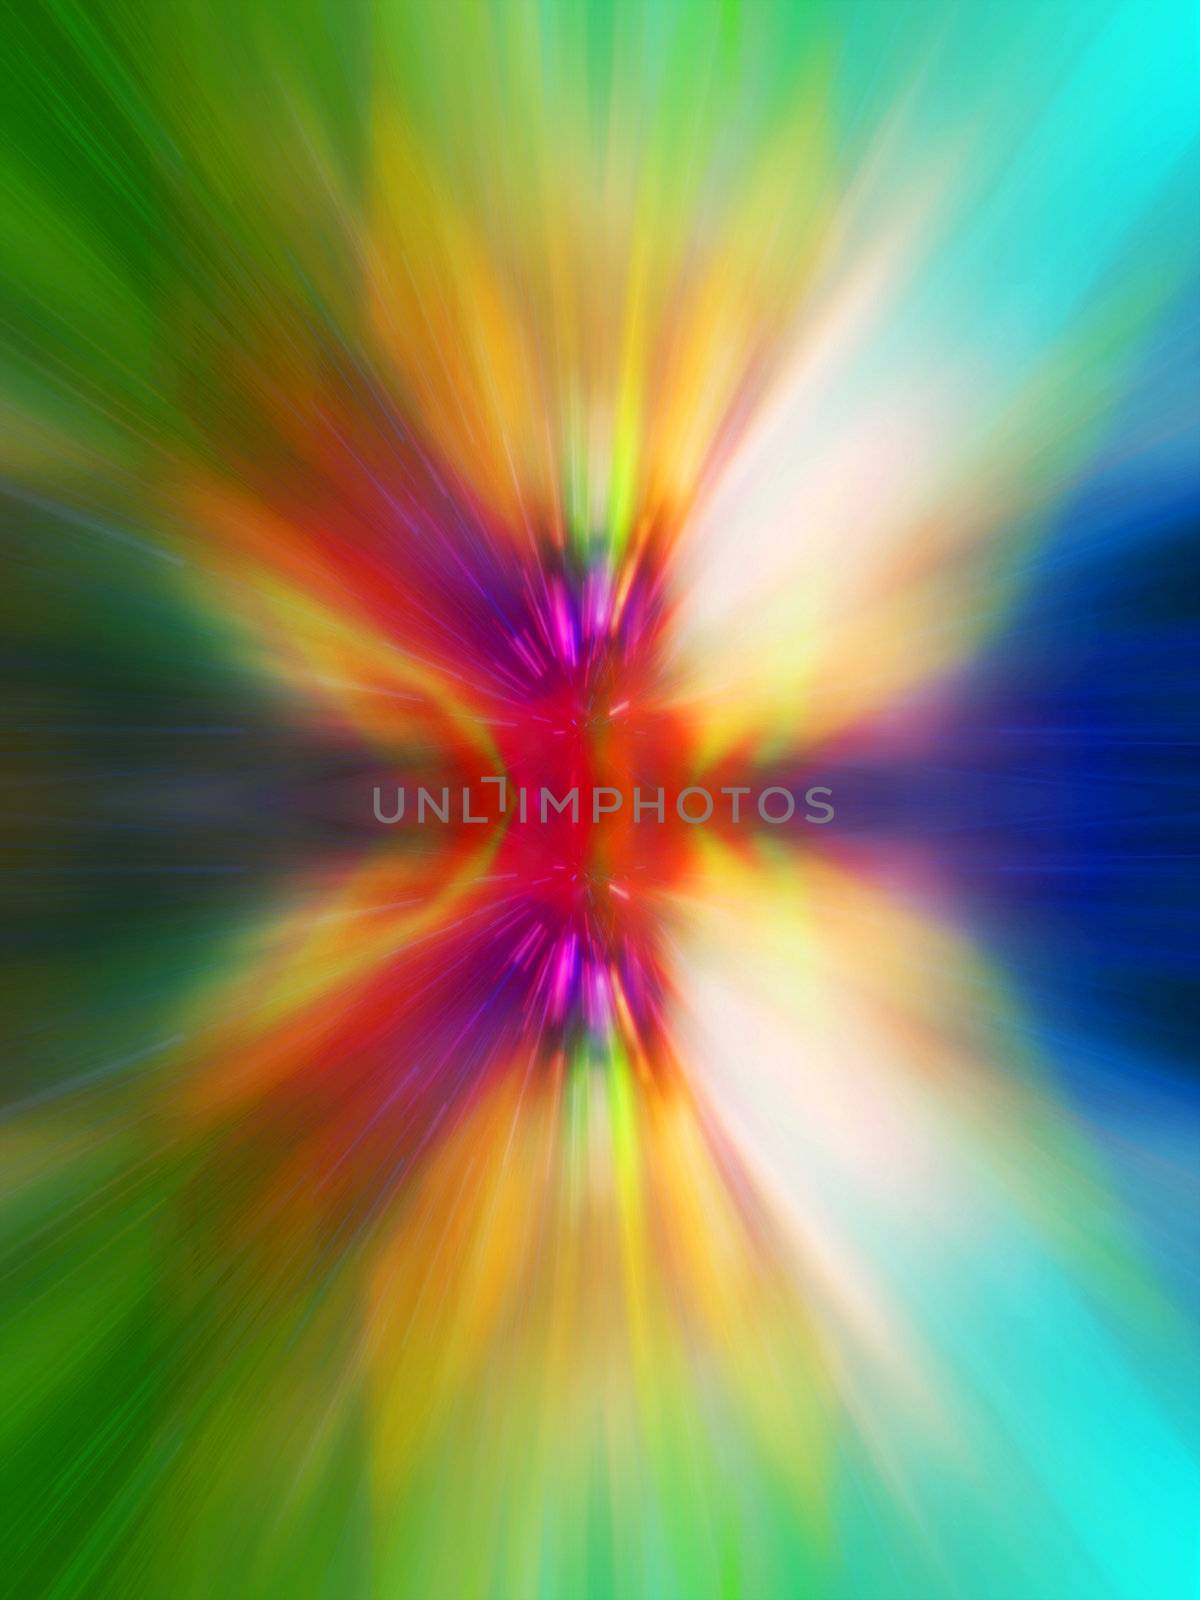 Abstract colourful explosion background with rays of light